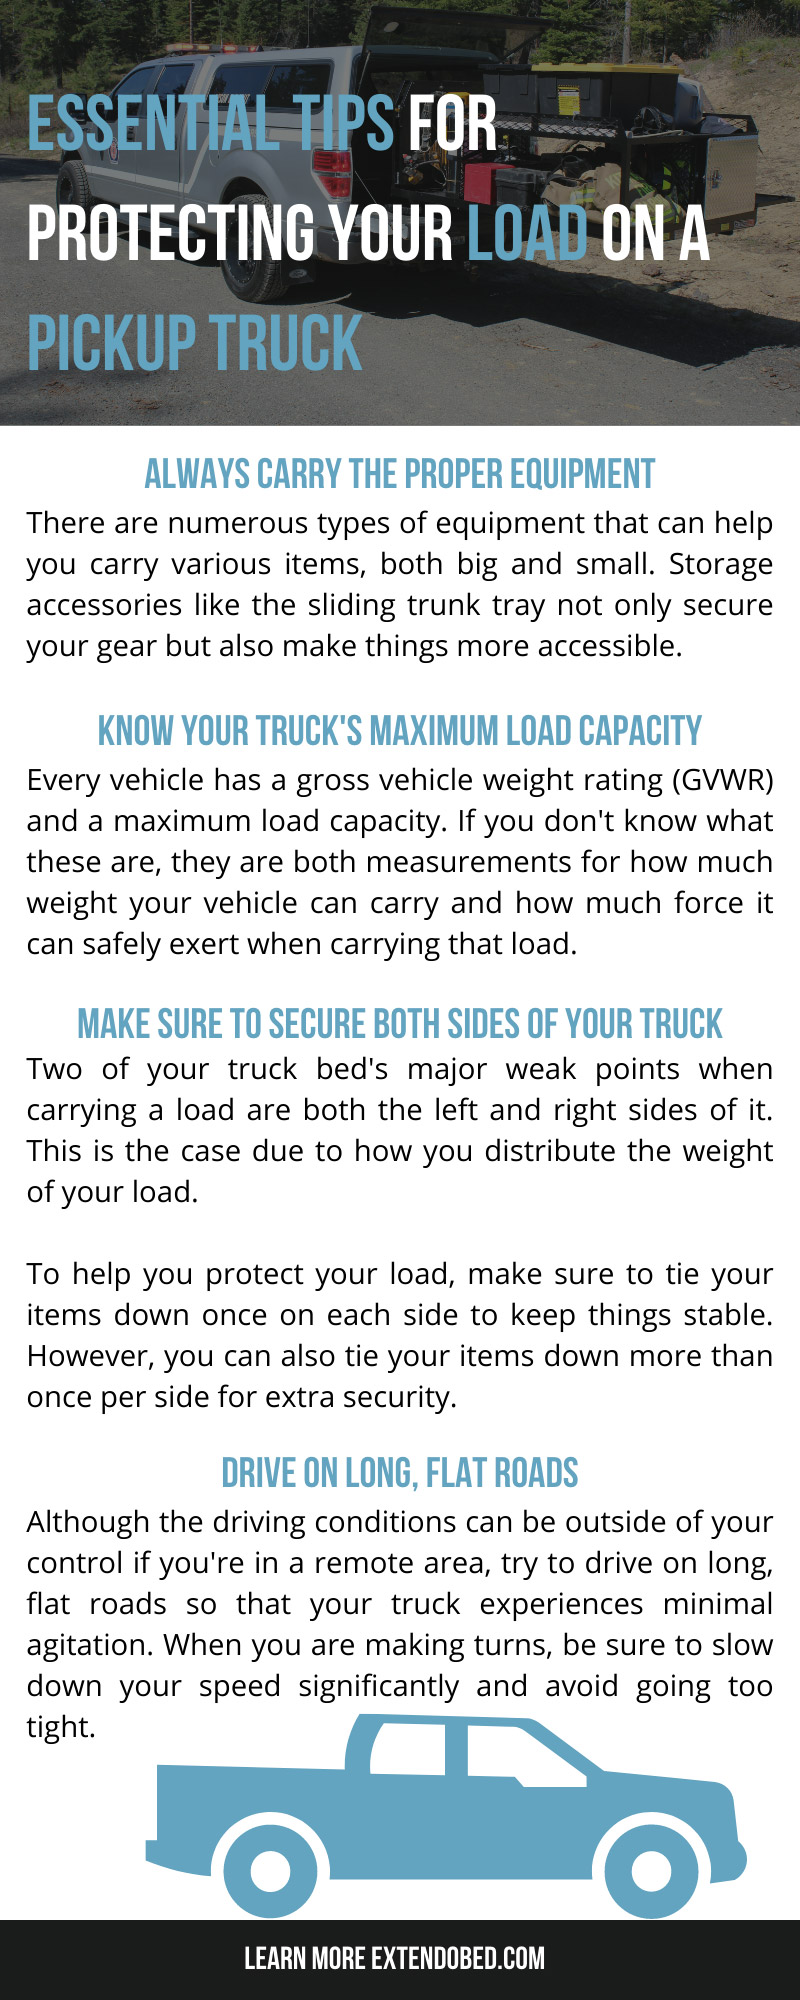 Essential Tips for Protecting Your Load on a Pickup Truck